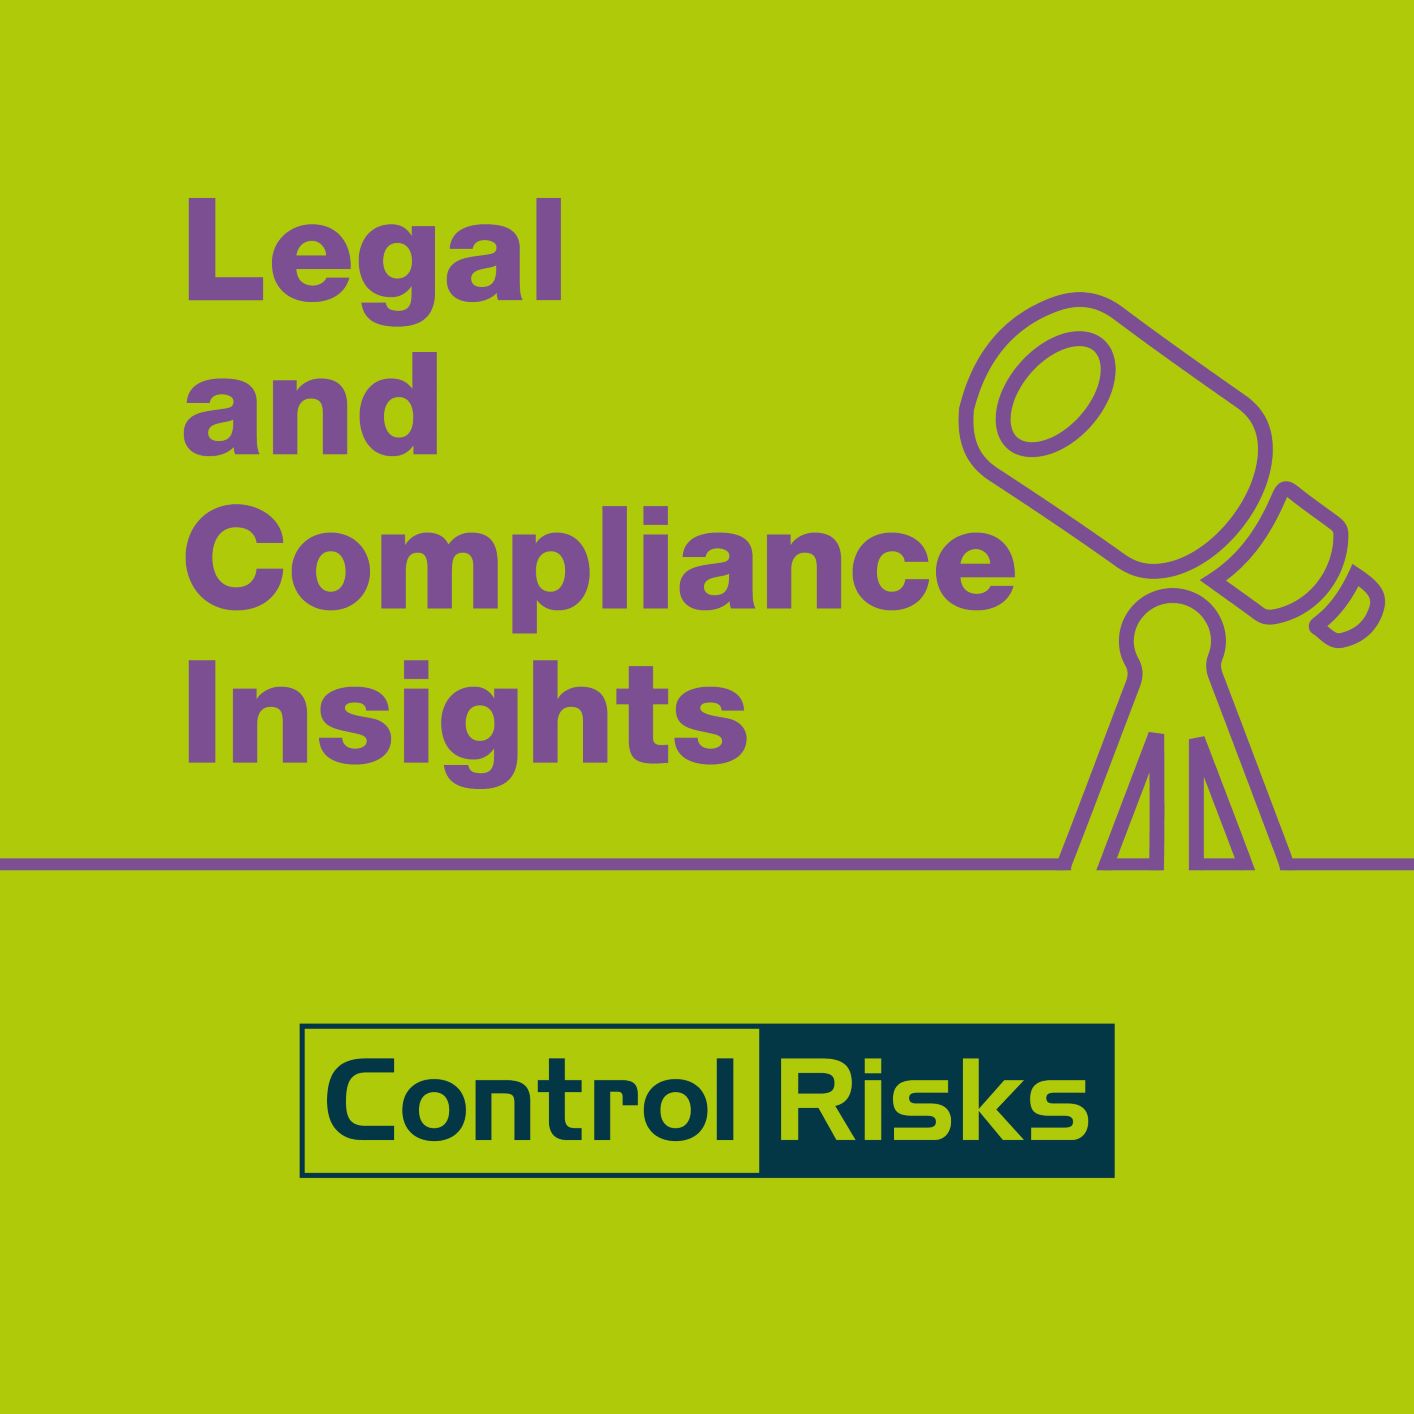 Legal and Compliance Insights